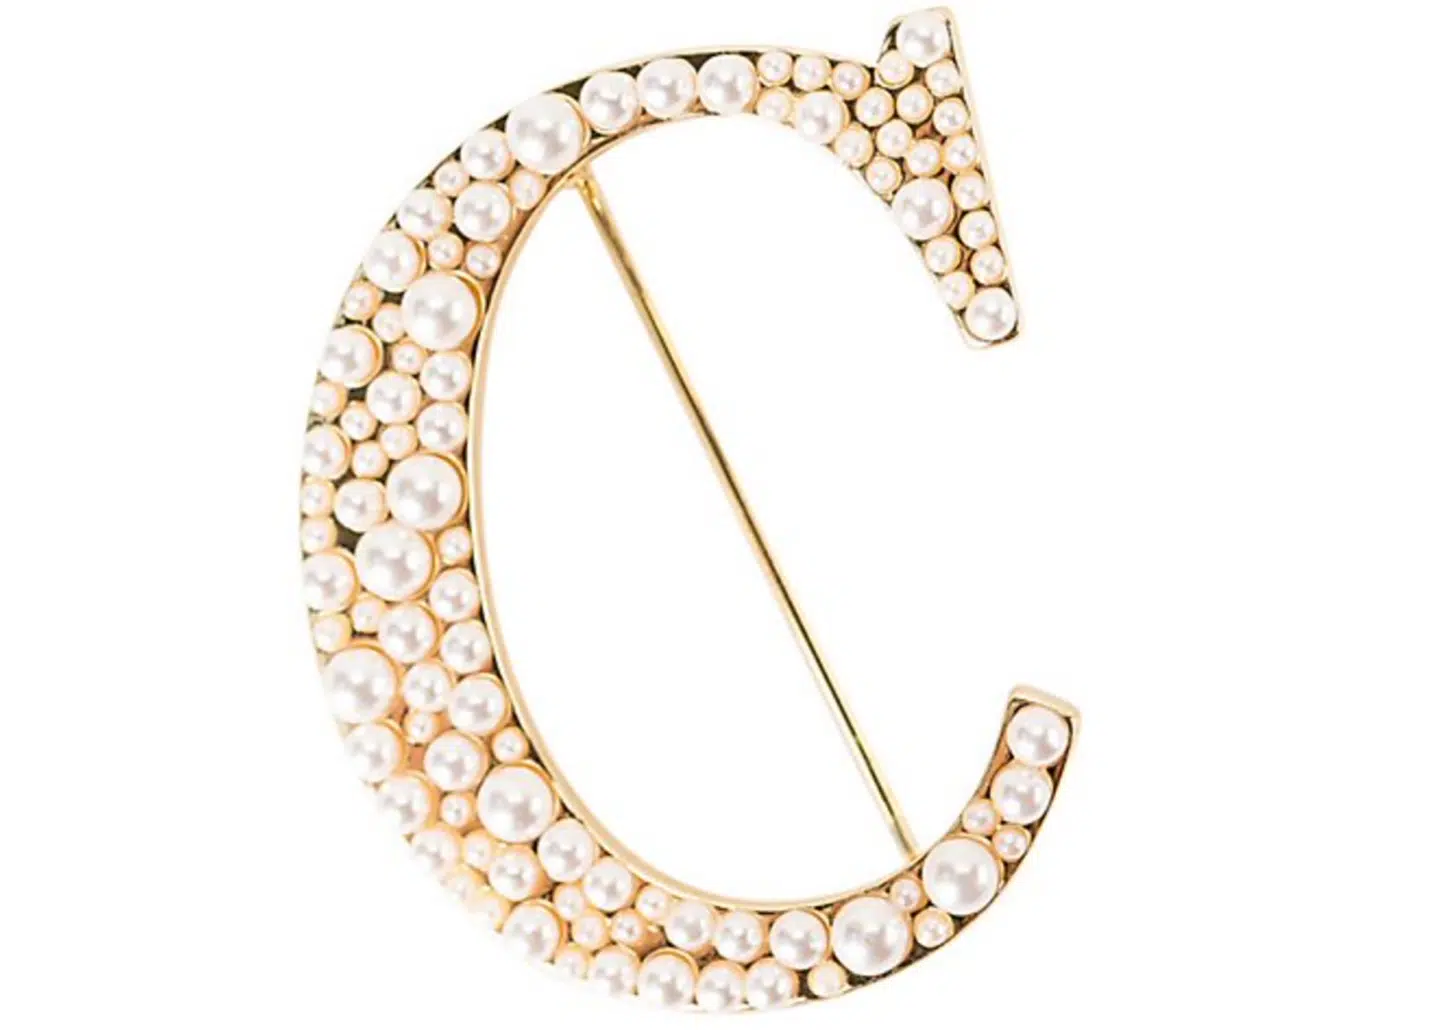 Luxurious Chanel brooch dupes, by fashion blogger What The Fab